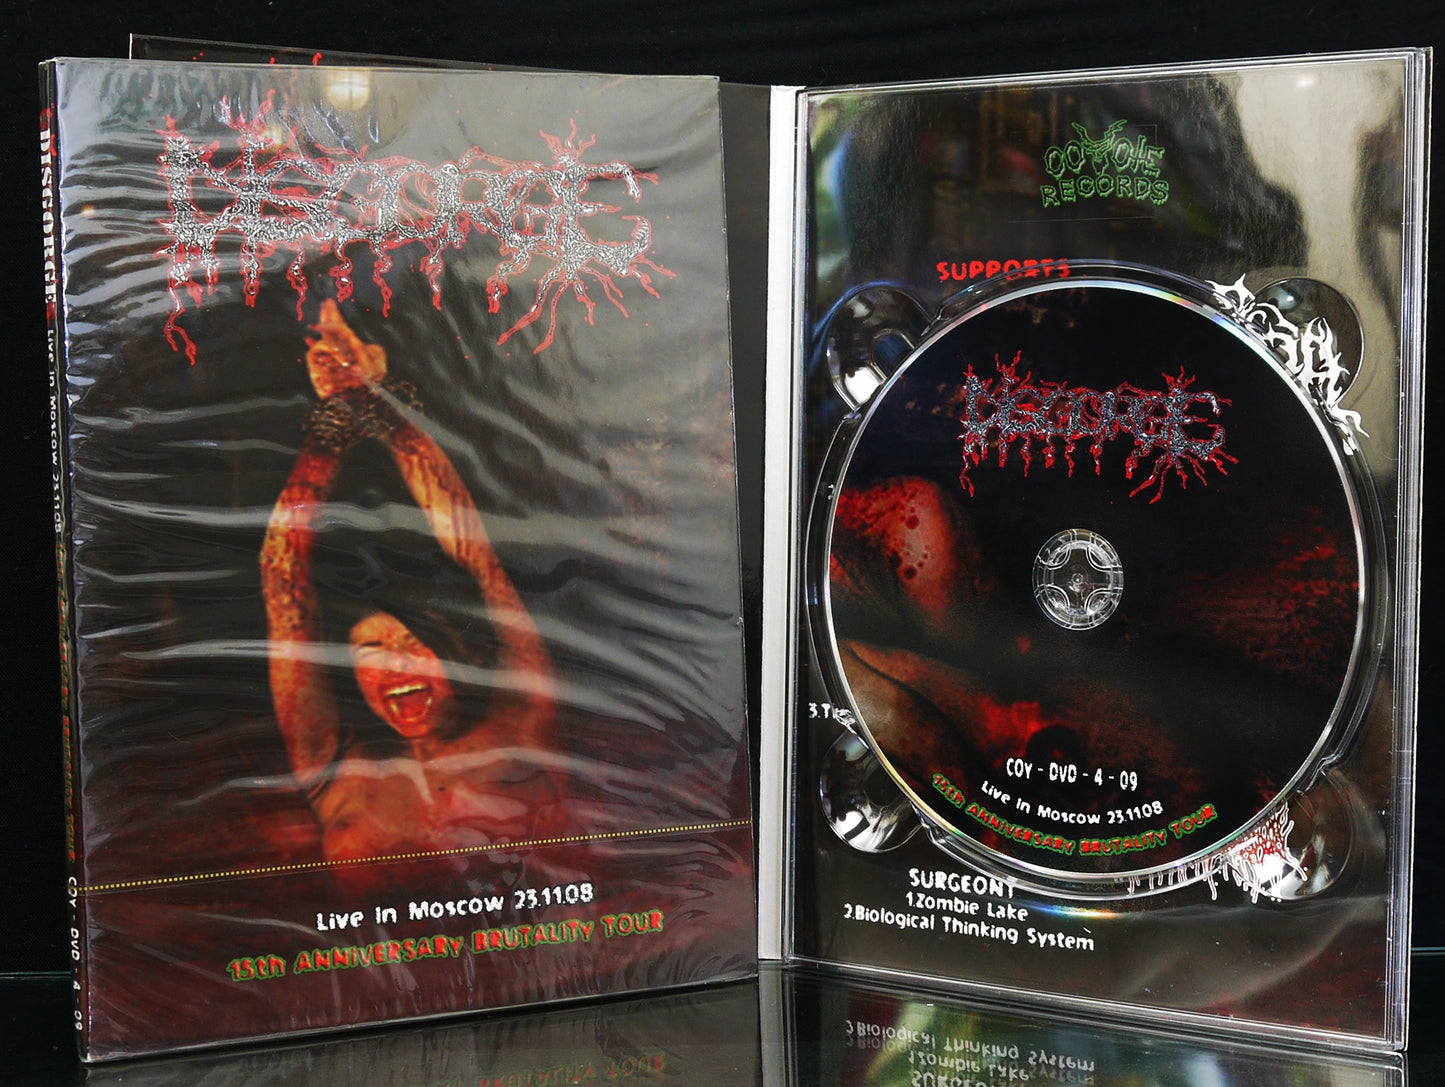 DISGORGE - Live In Moscow 23.11.08 - 15th Anniversary Brutality Tour DVD